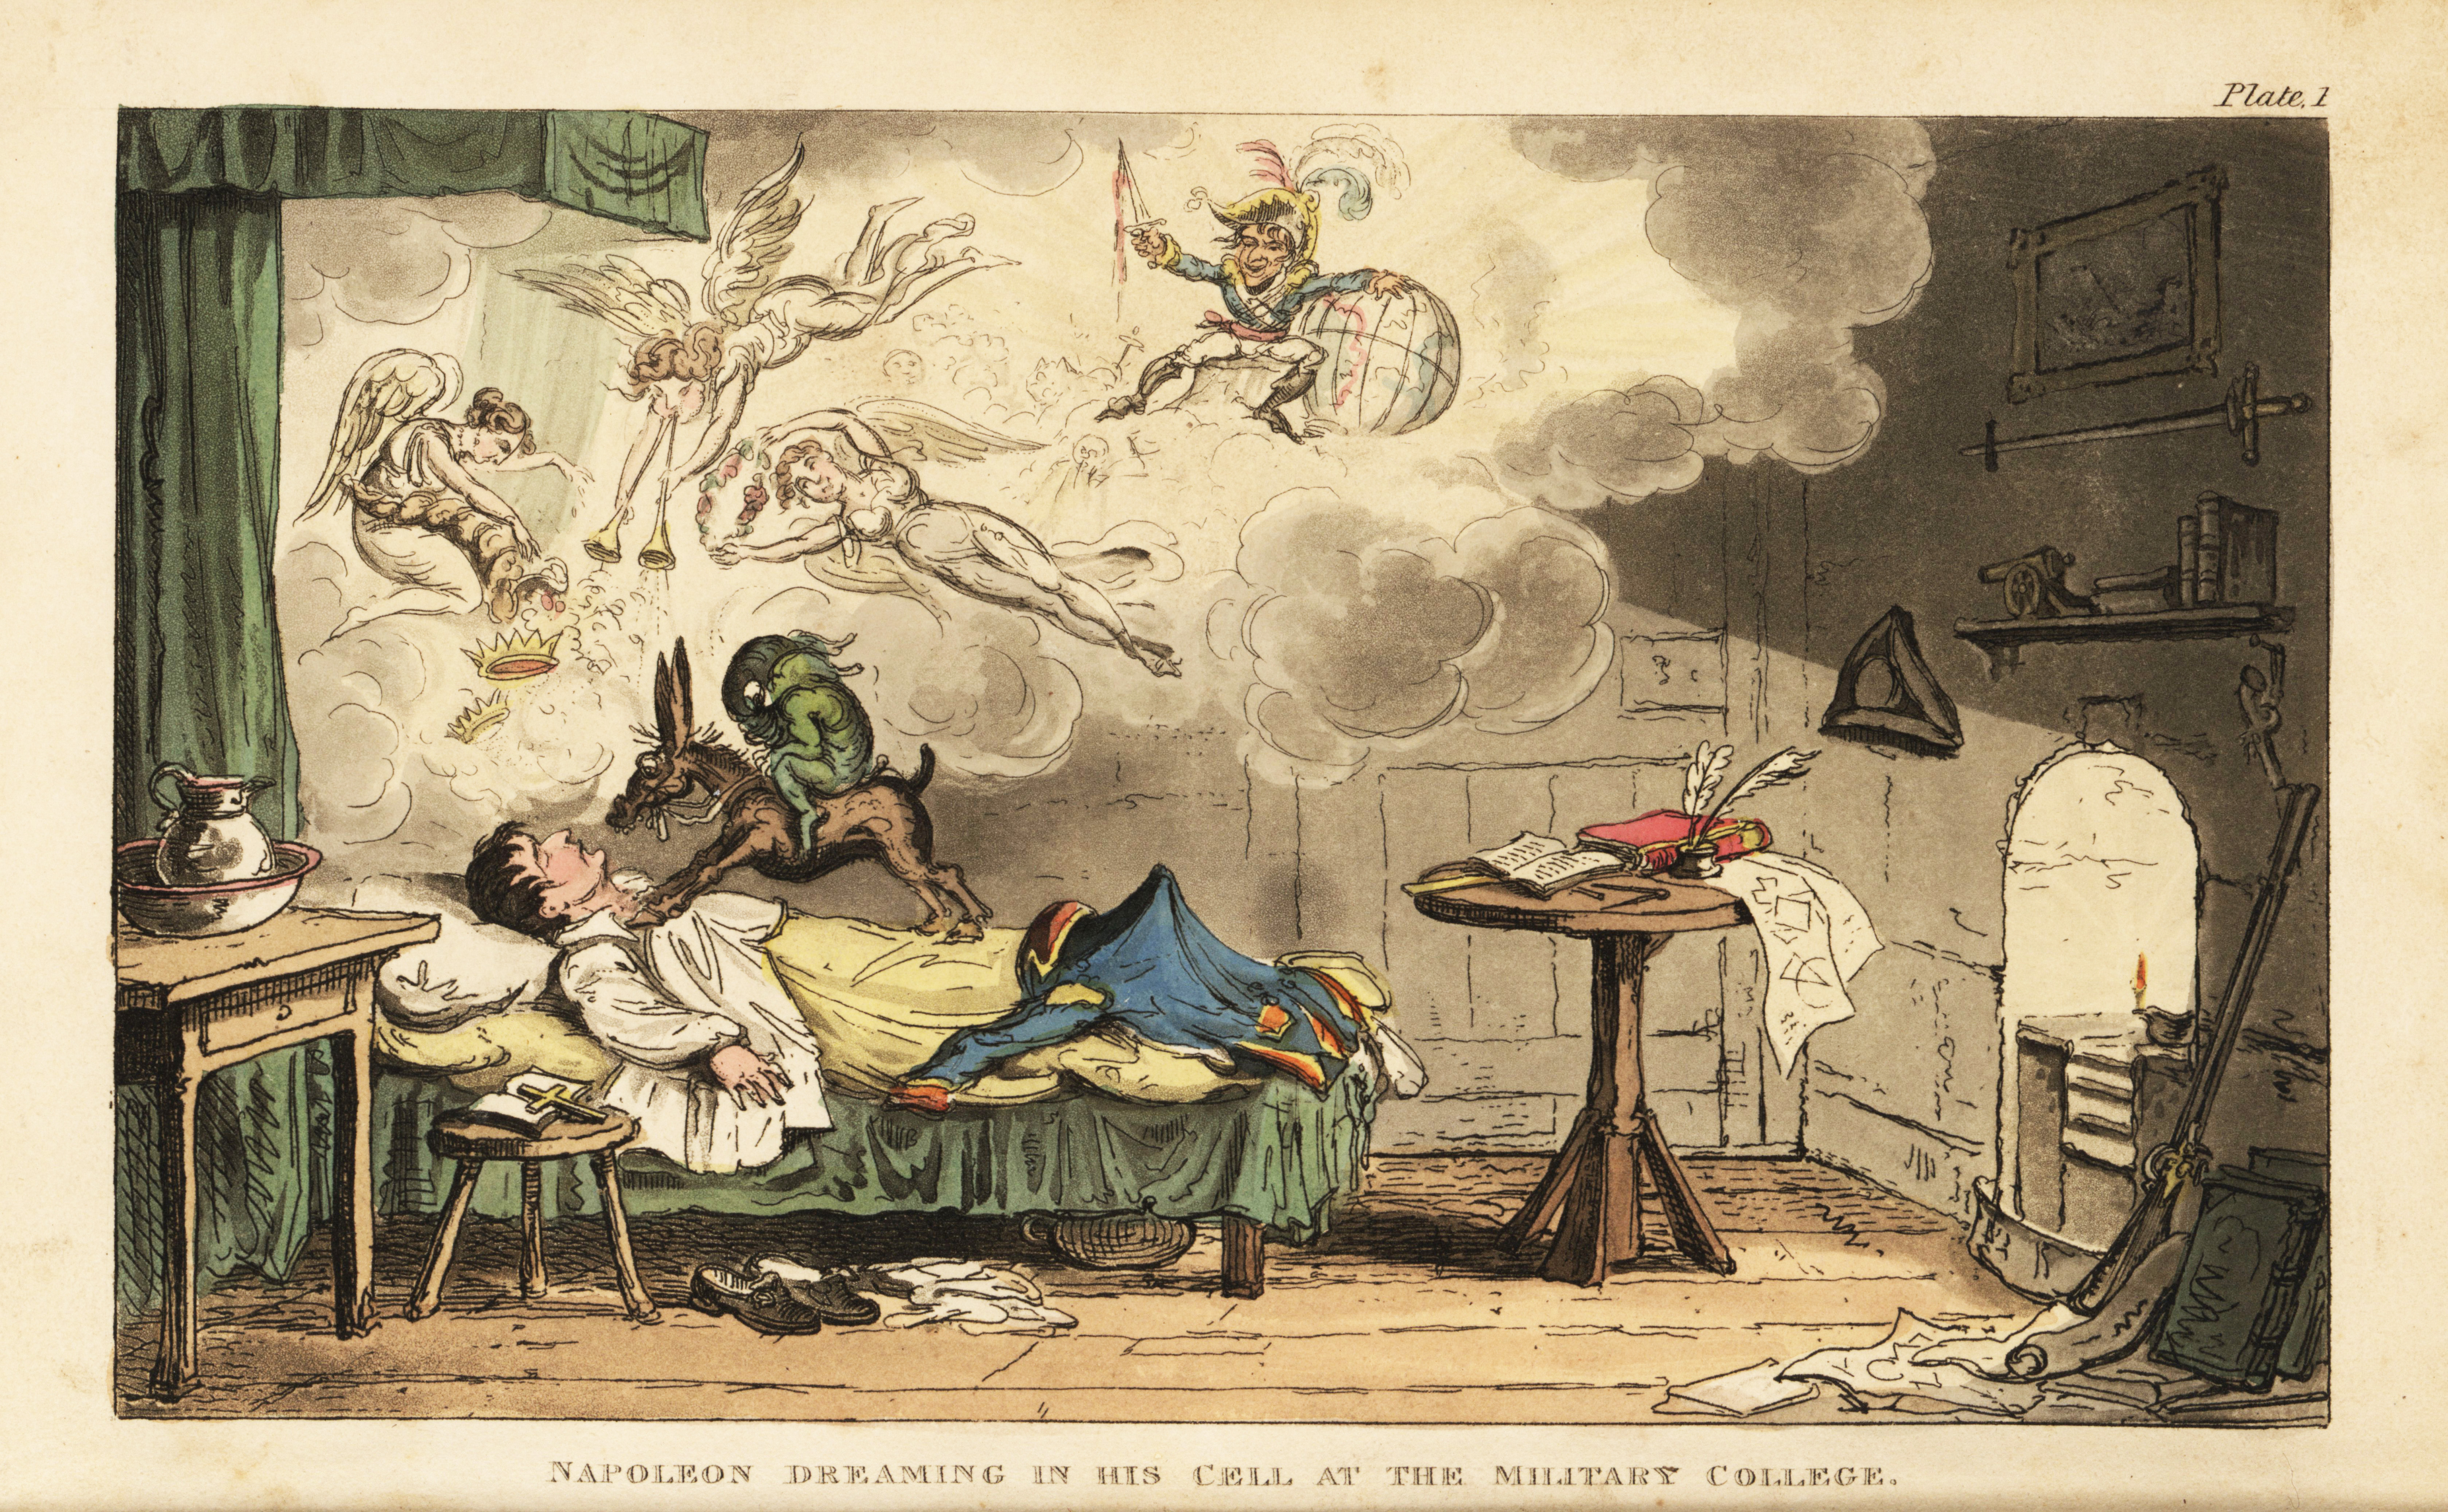 An old cartoon of Napoleon sleeping at his military college.